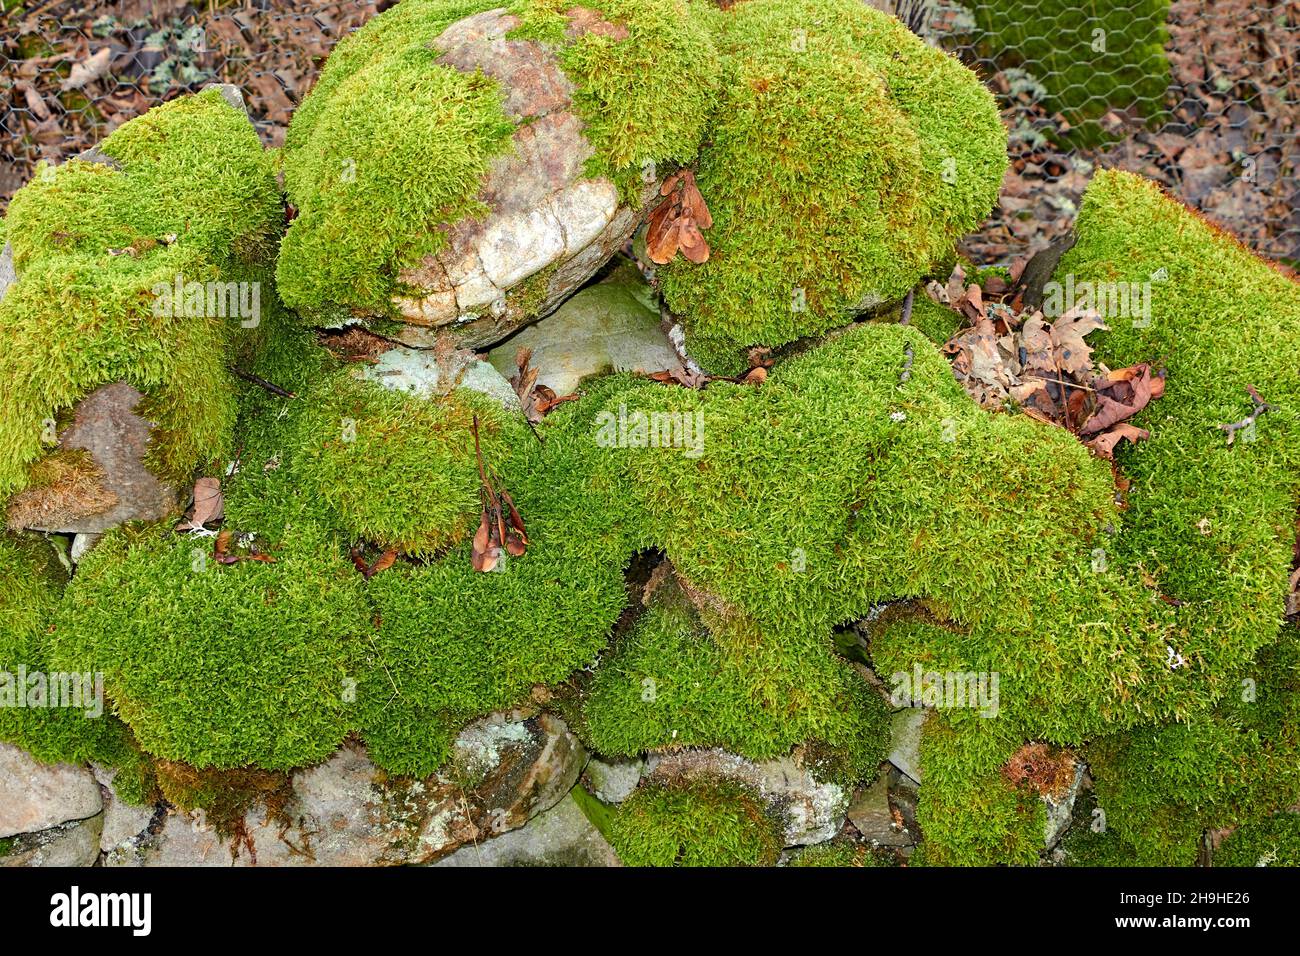 PROLIFIC GROWTH OF MOSS Bryophyta GROWING ON STONES IN A WALL Stock Photo